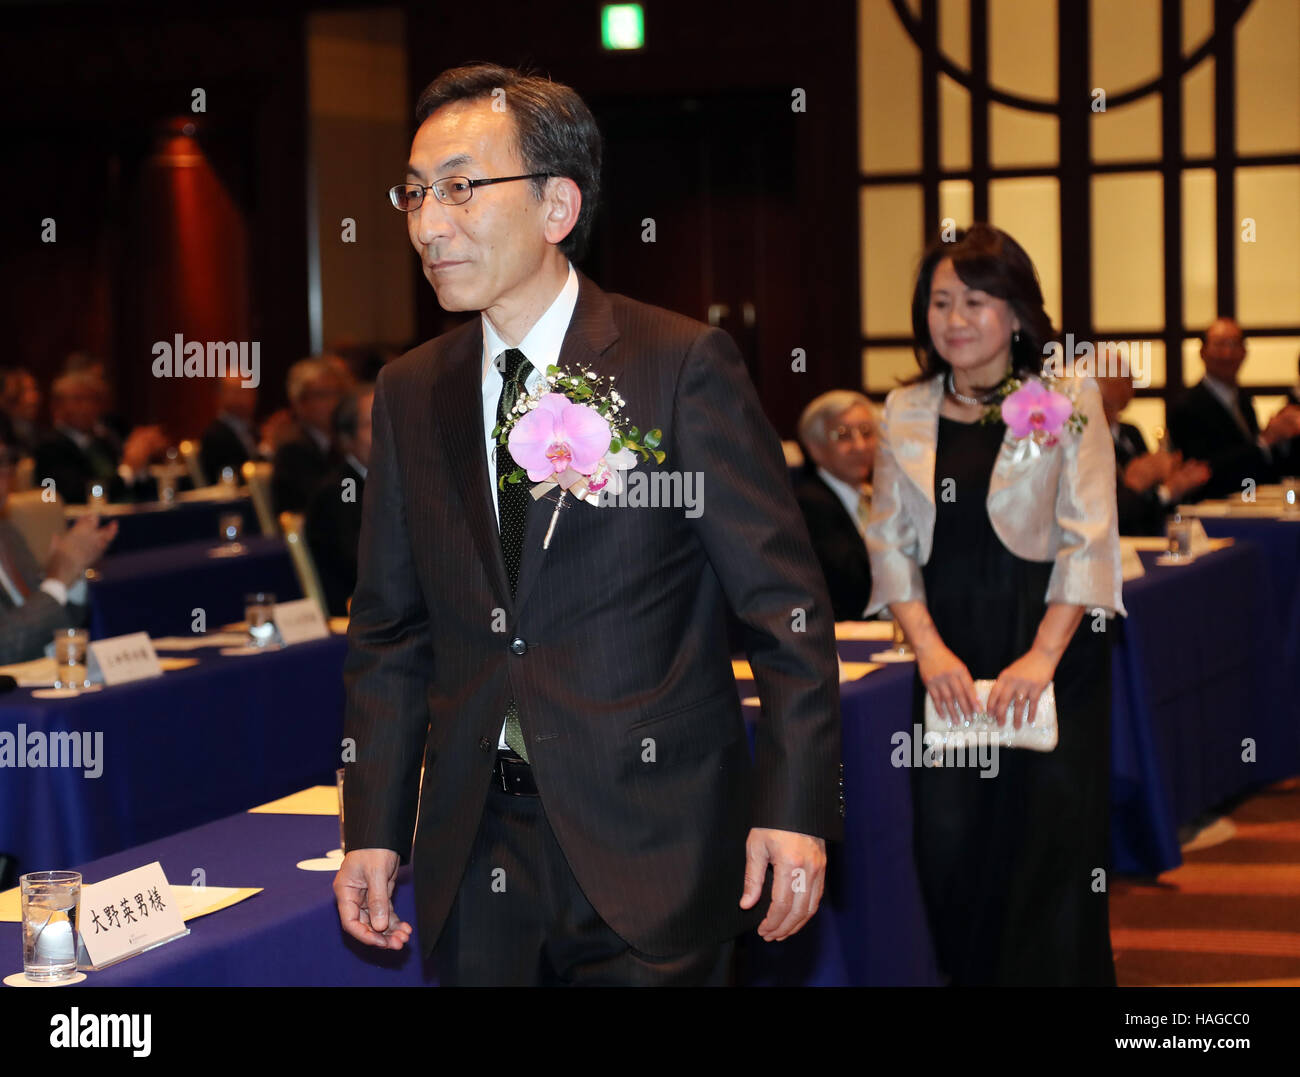 Tokyo, Japan. 30th Nov, 2016. Japan's Tohoku University professor Hideo Ohno arrives at anawrding ceremony as he receives Japanese electronics giant NEC's C&C Prize in Tokyo on Wednesday, November 30, 2016. Ohno have developed the spintronics technology to apply the new types of integrated circuit, power saving spintronic logic integrated circuits enabling to maintain non-volatile operation when processing and storing data while its power is off, enabling electronic devices to start instantly and consume zero electricity while in standby mode. © Yoshio Tsunoda/AFLO/Alamy Live News Stock Photo